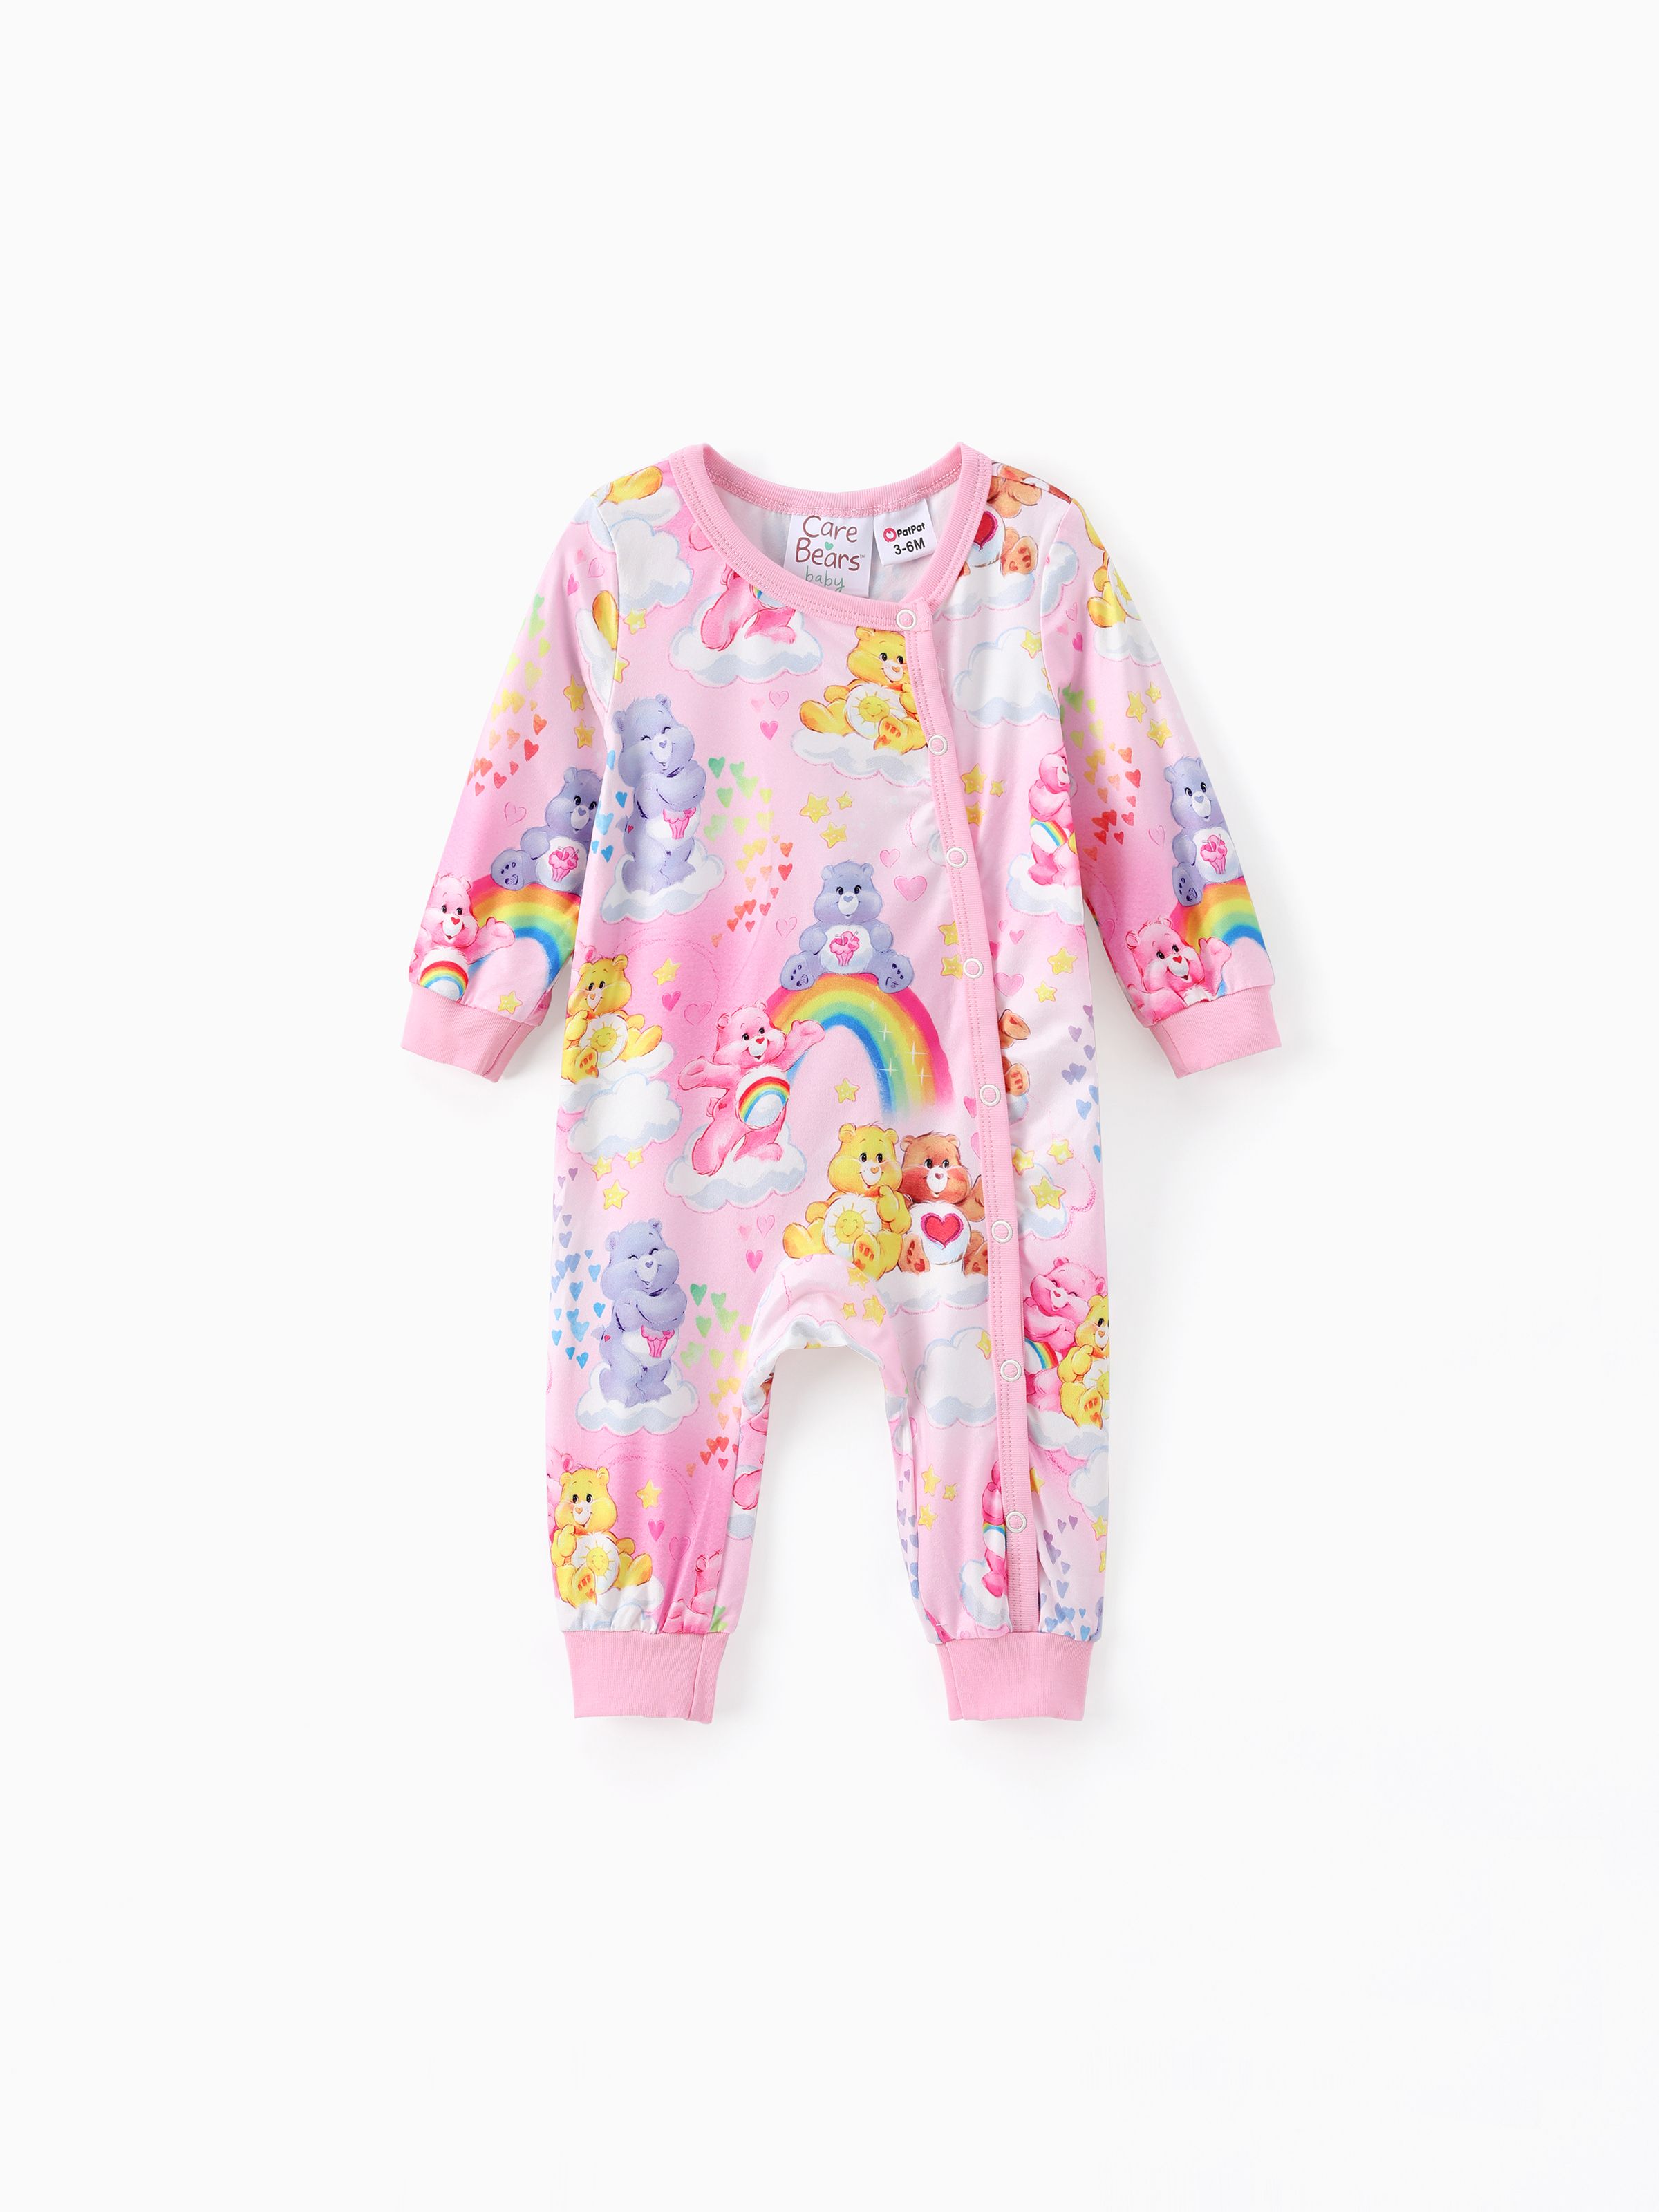 

Care Bears Baby Girl Character Print Long-sleeve Cute Romper/One Piece